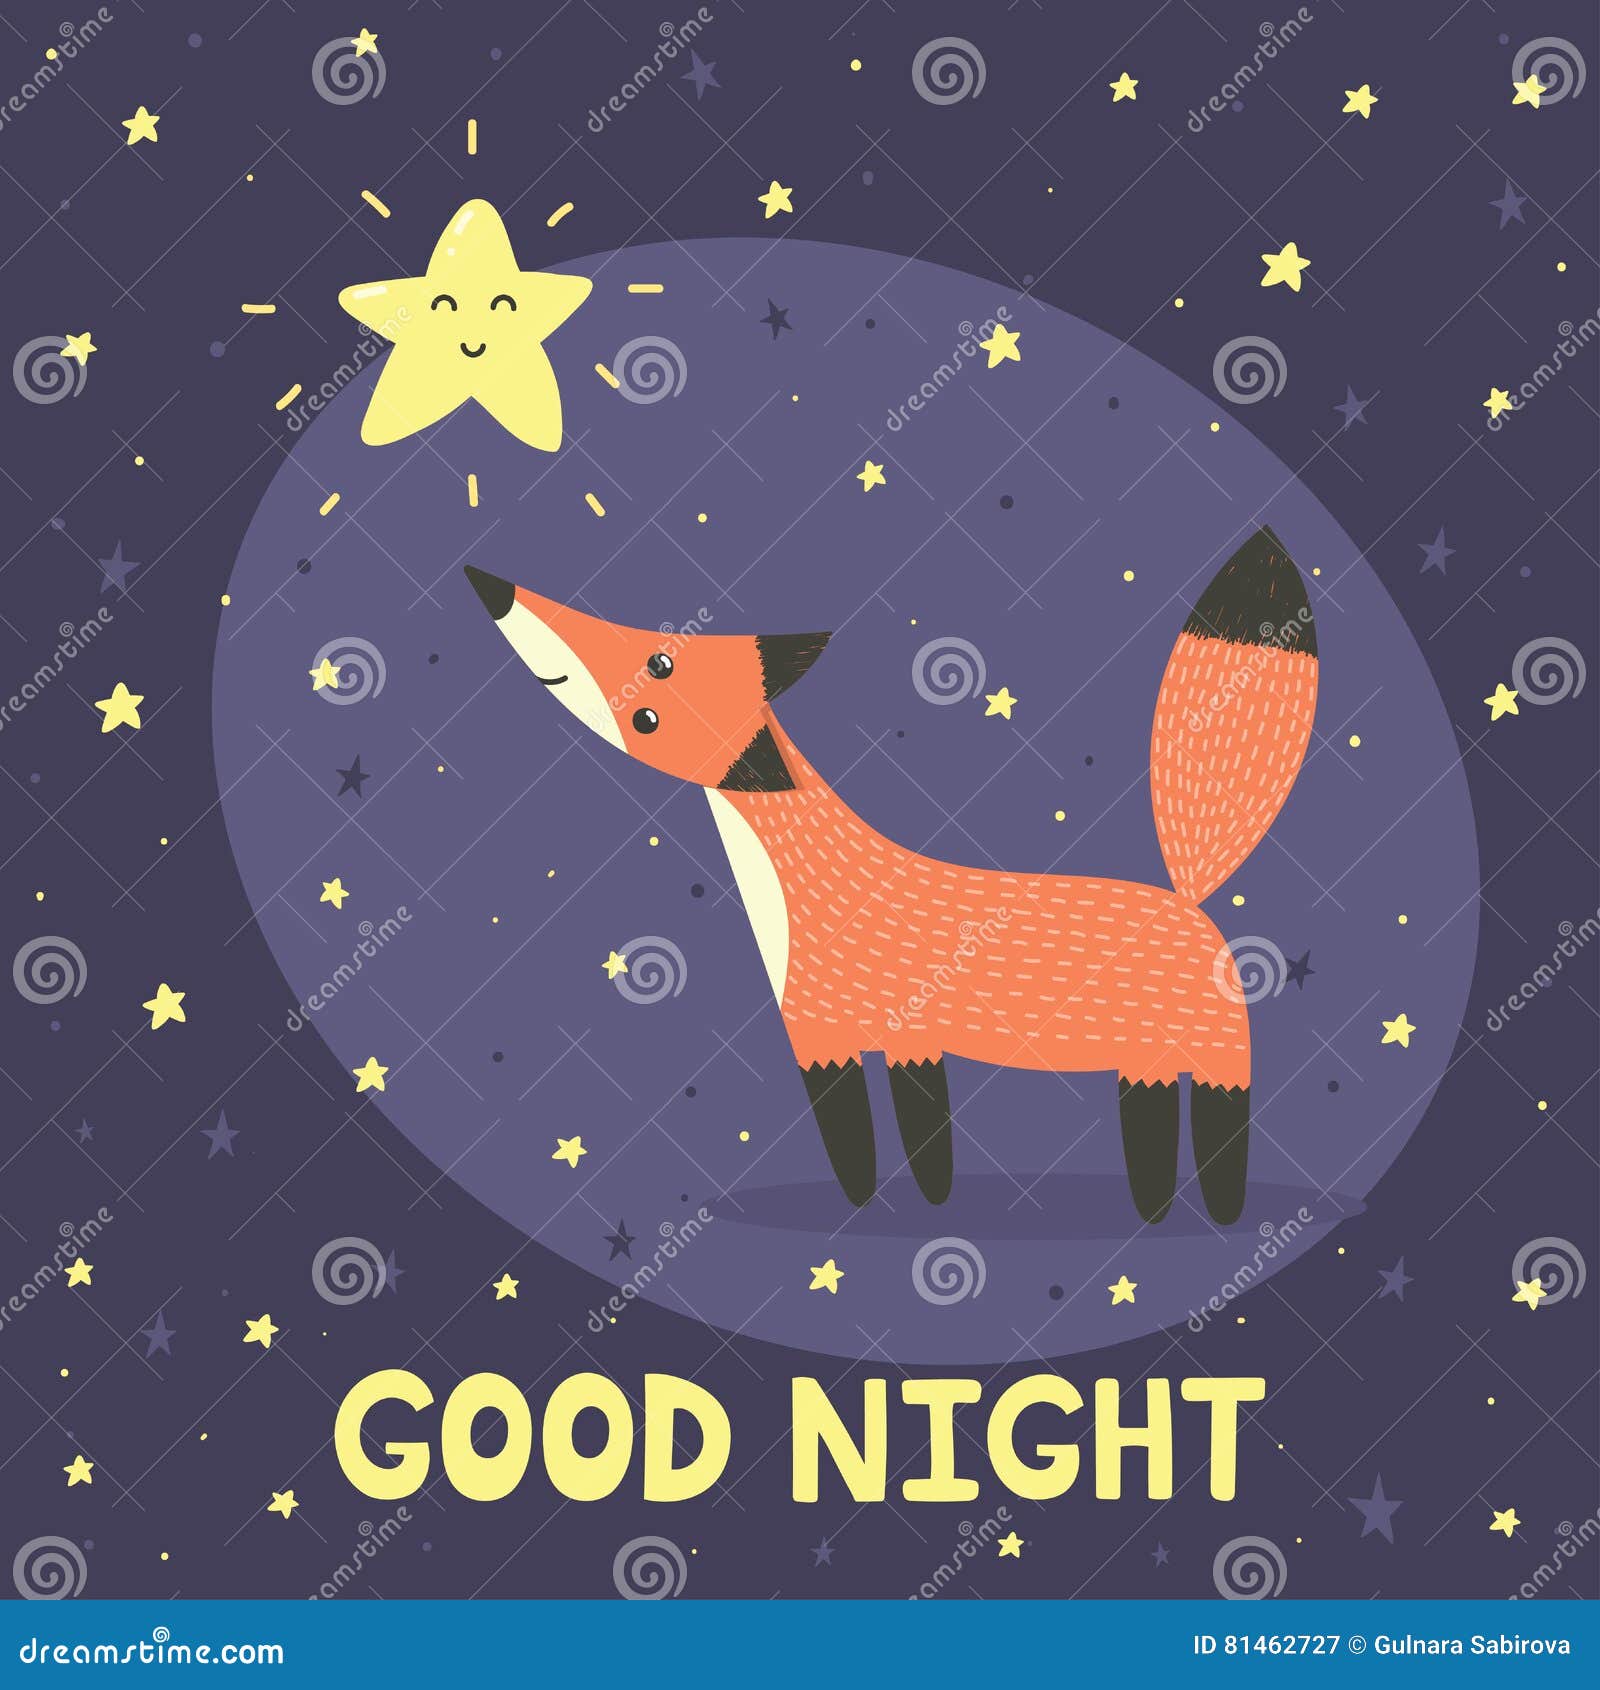 Good Night Card With Cute Fox And Star Stock Vector - Illustration of ...